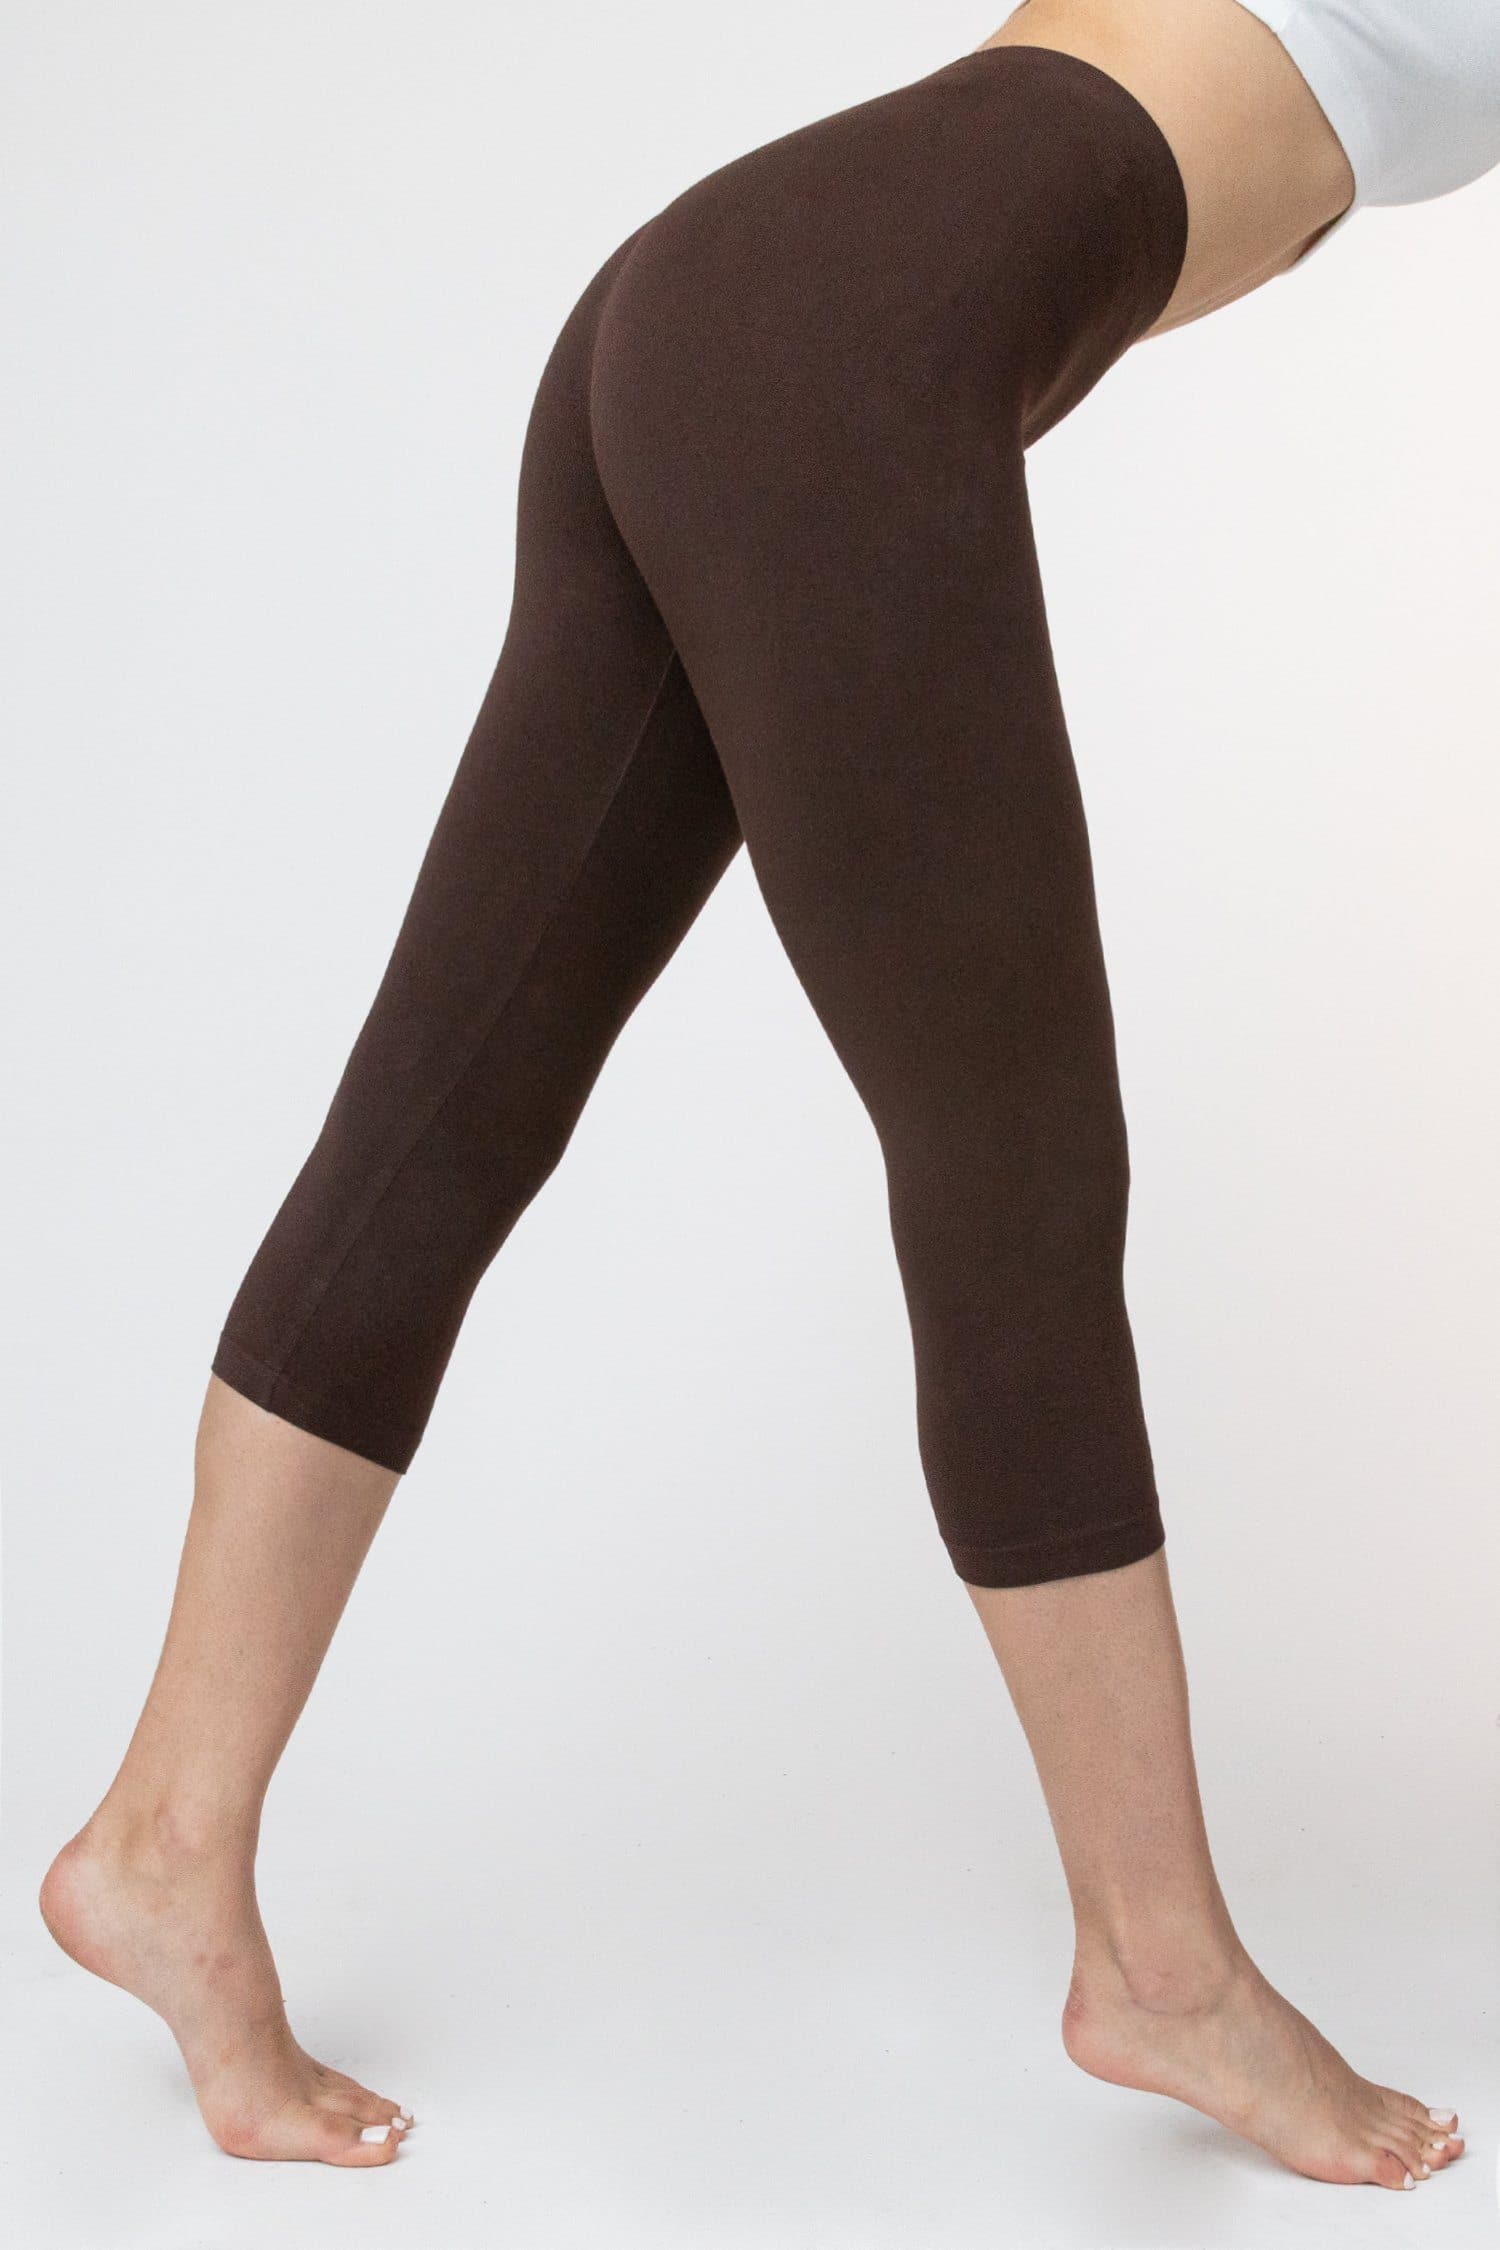 Buy online Polyester Metallic Solid Legging from Capris & Leggings for  Women by Valles365 By S.c. for ₹549 at 68% off